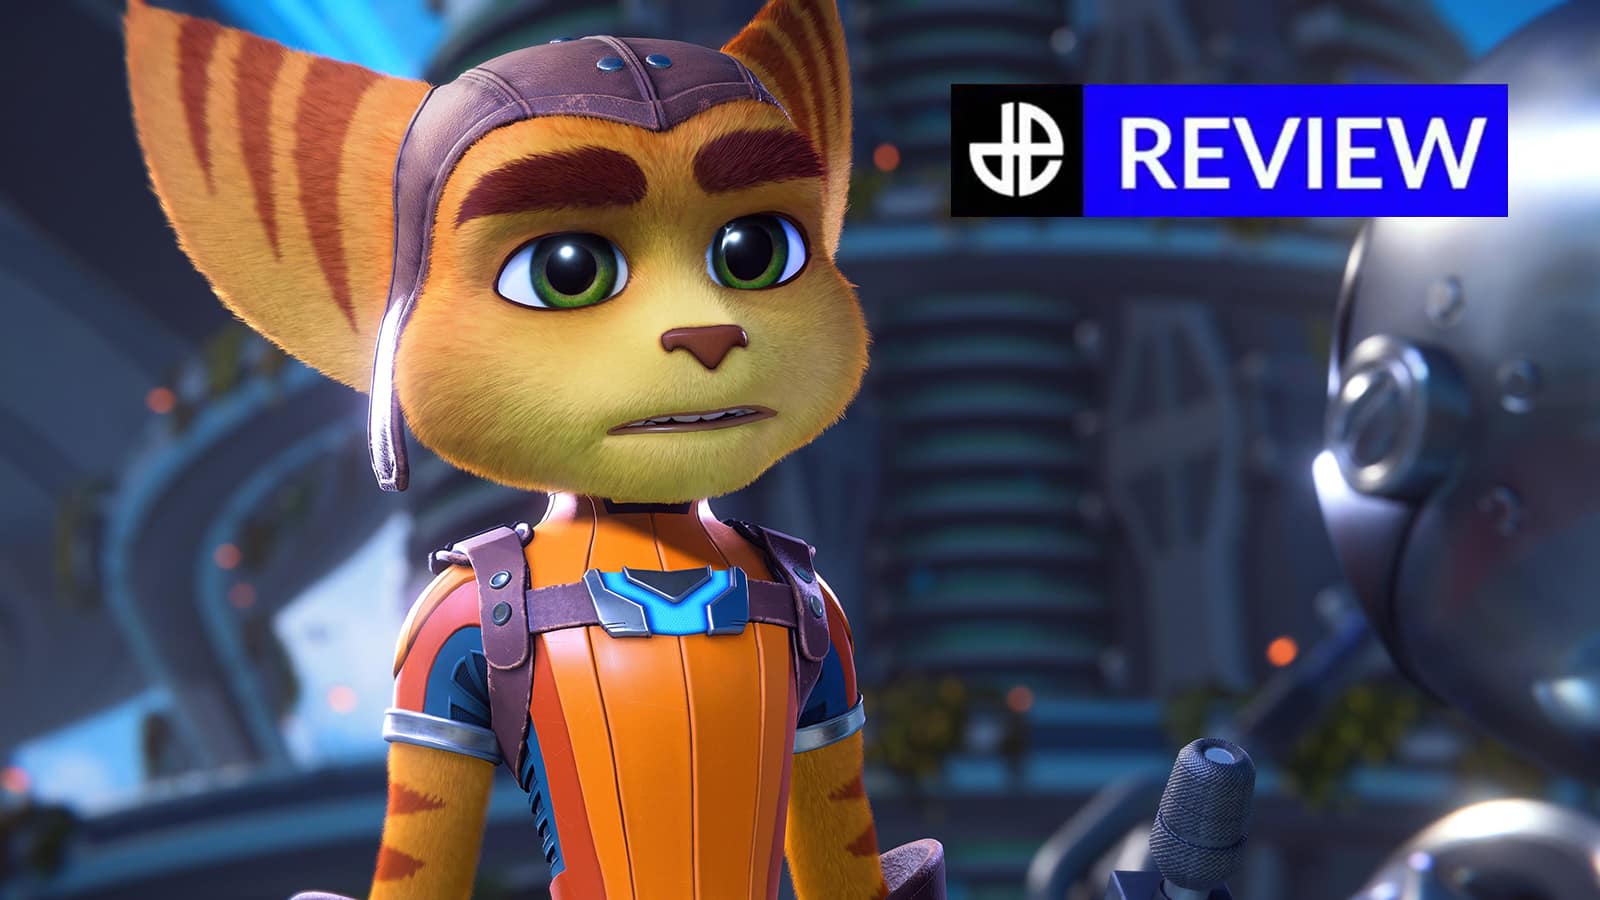 Ratchet & Clank: Rift Apart showcases PS5's capabilities with heart and  humor